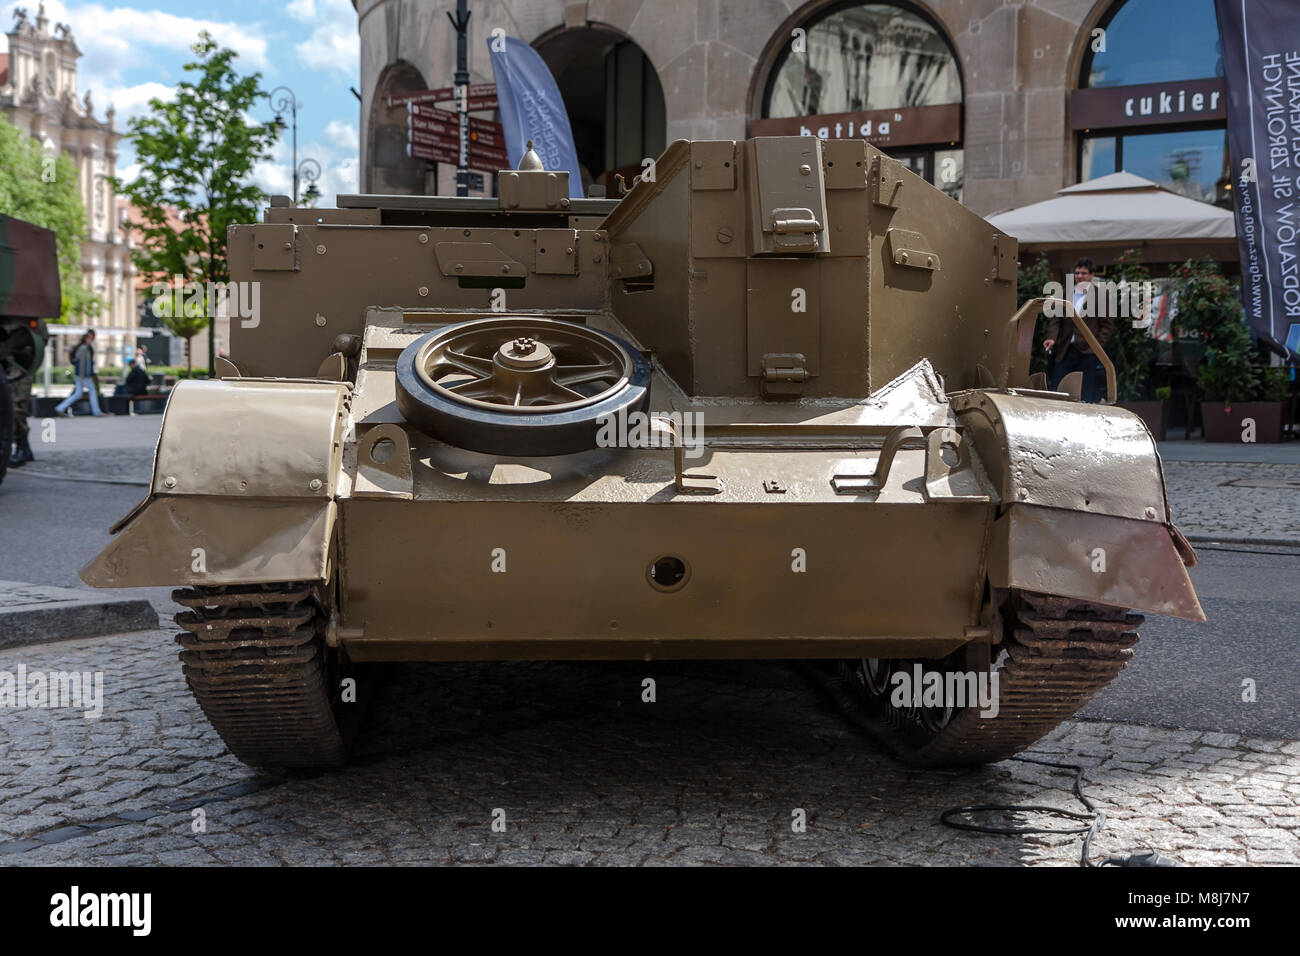 T 16 Universal Carrier, Bren Gun Carrier, light armored tracked vehicle, Second World War. Public celebrations. WARSAW, POLAND - MAY 08, 2015 Stock Photo